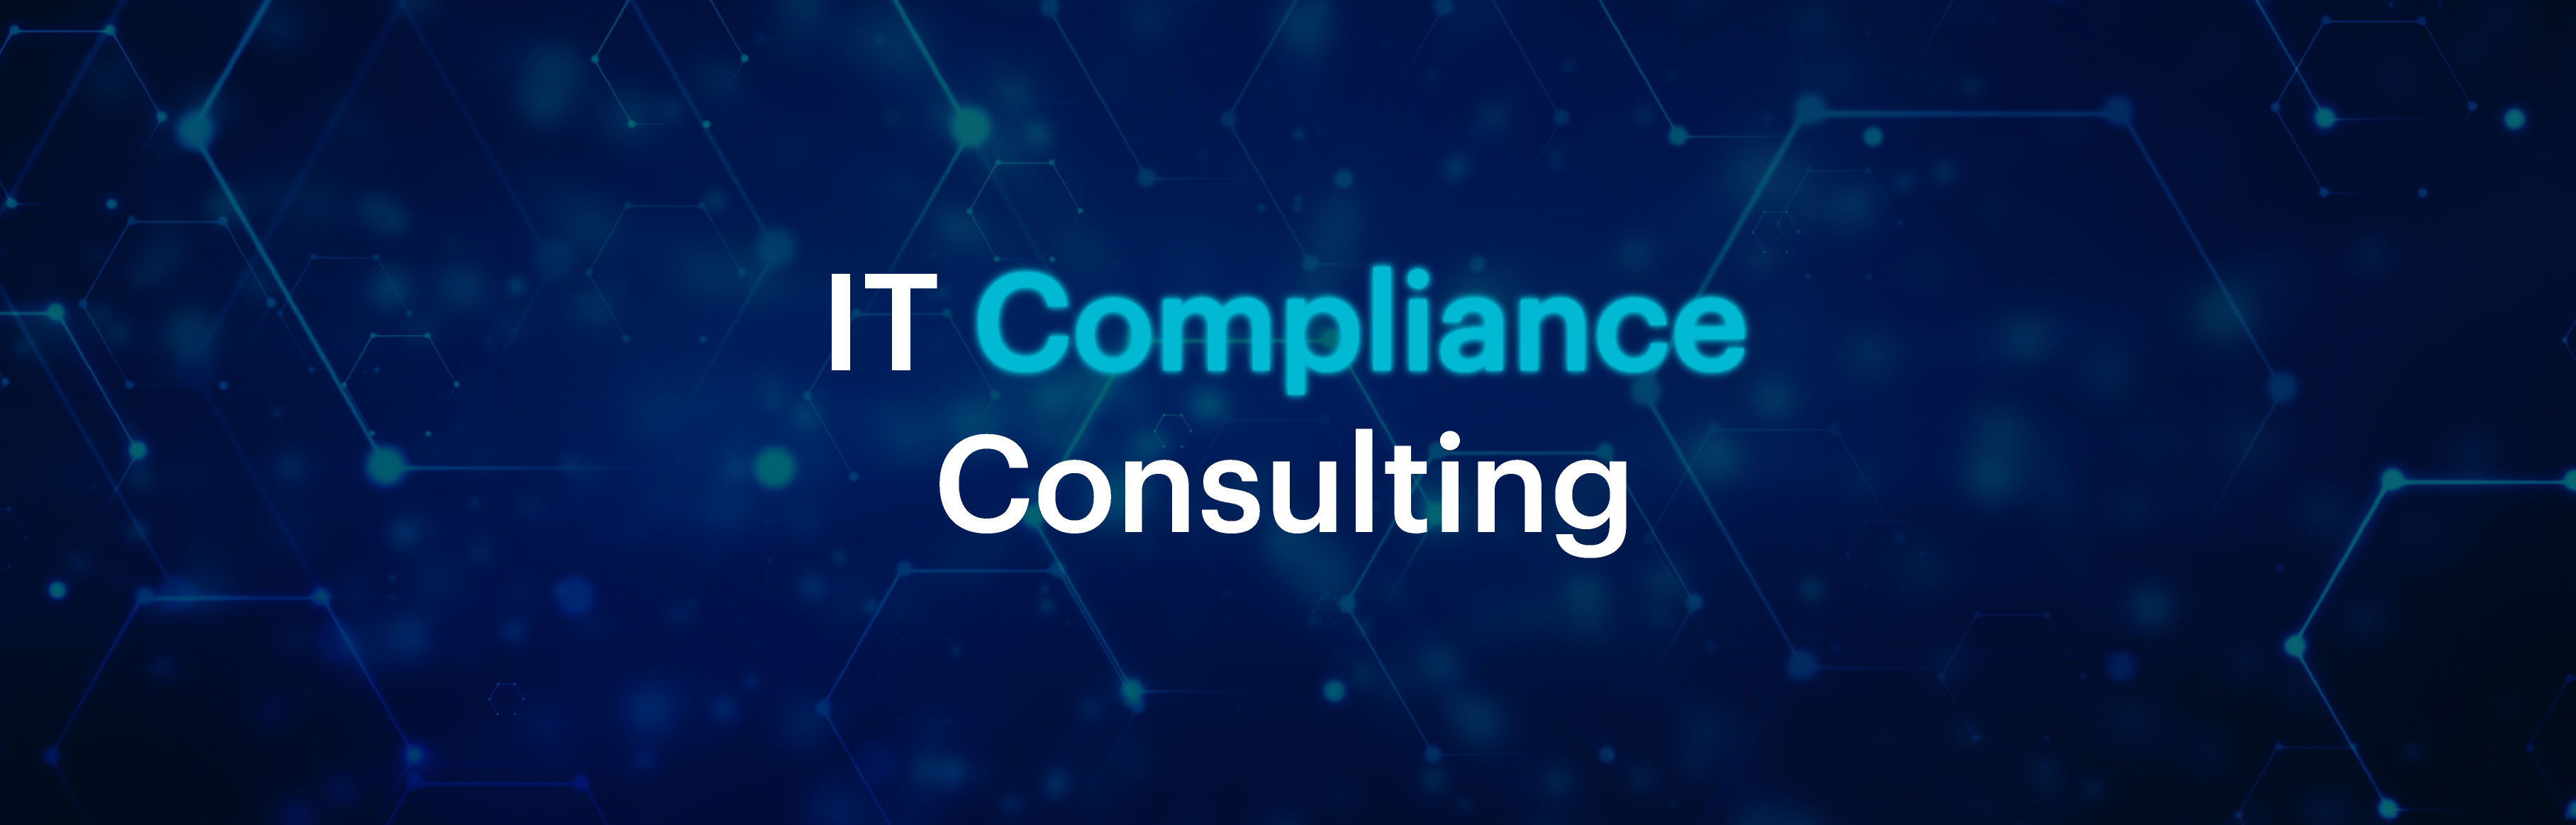 IT Compliance Consulting